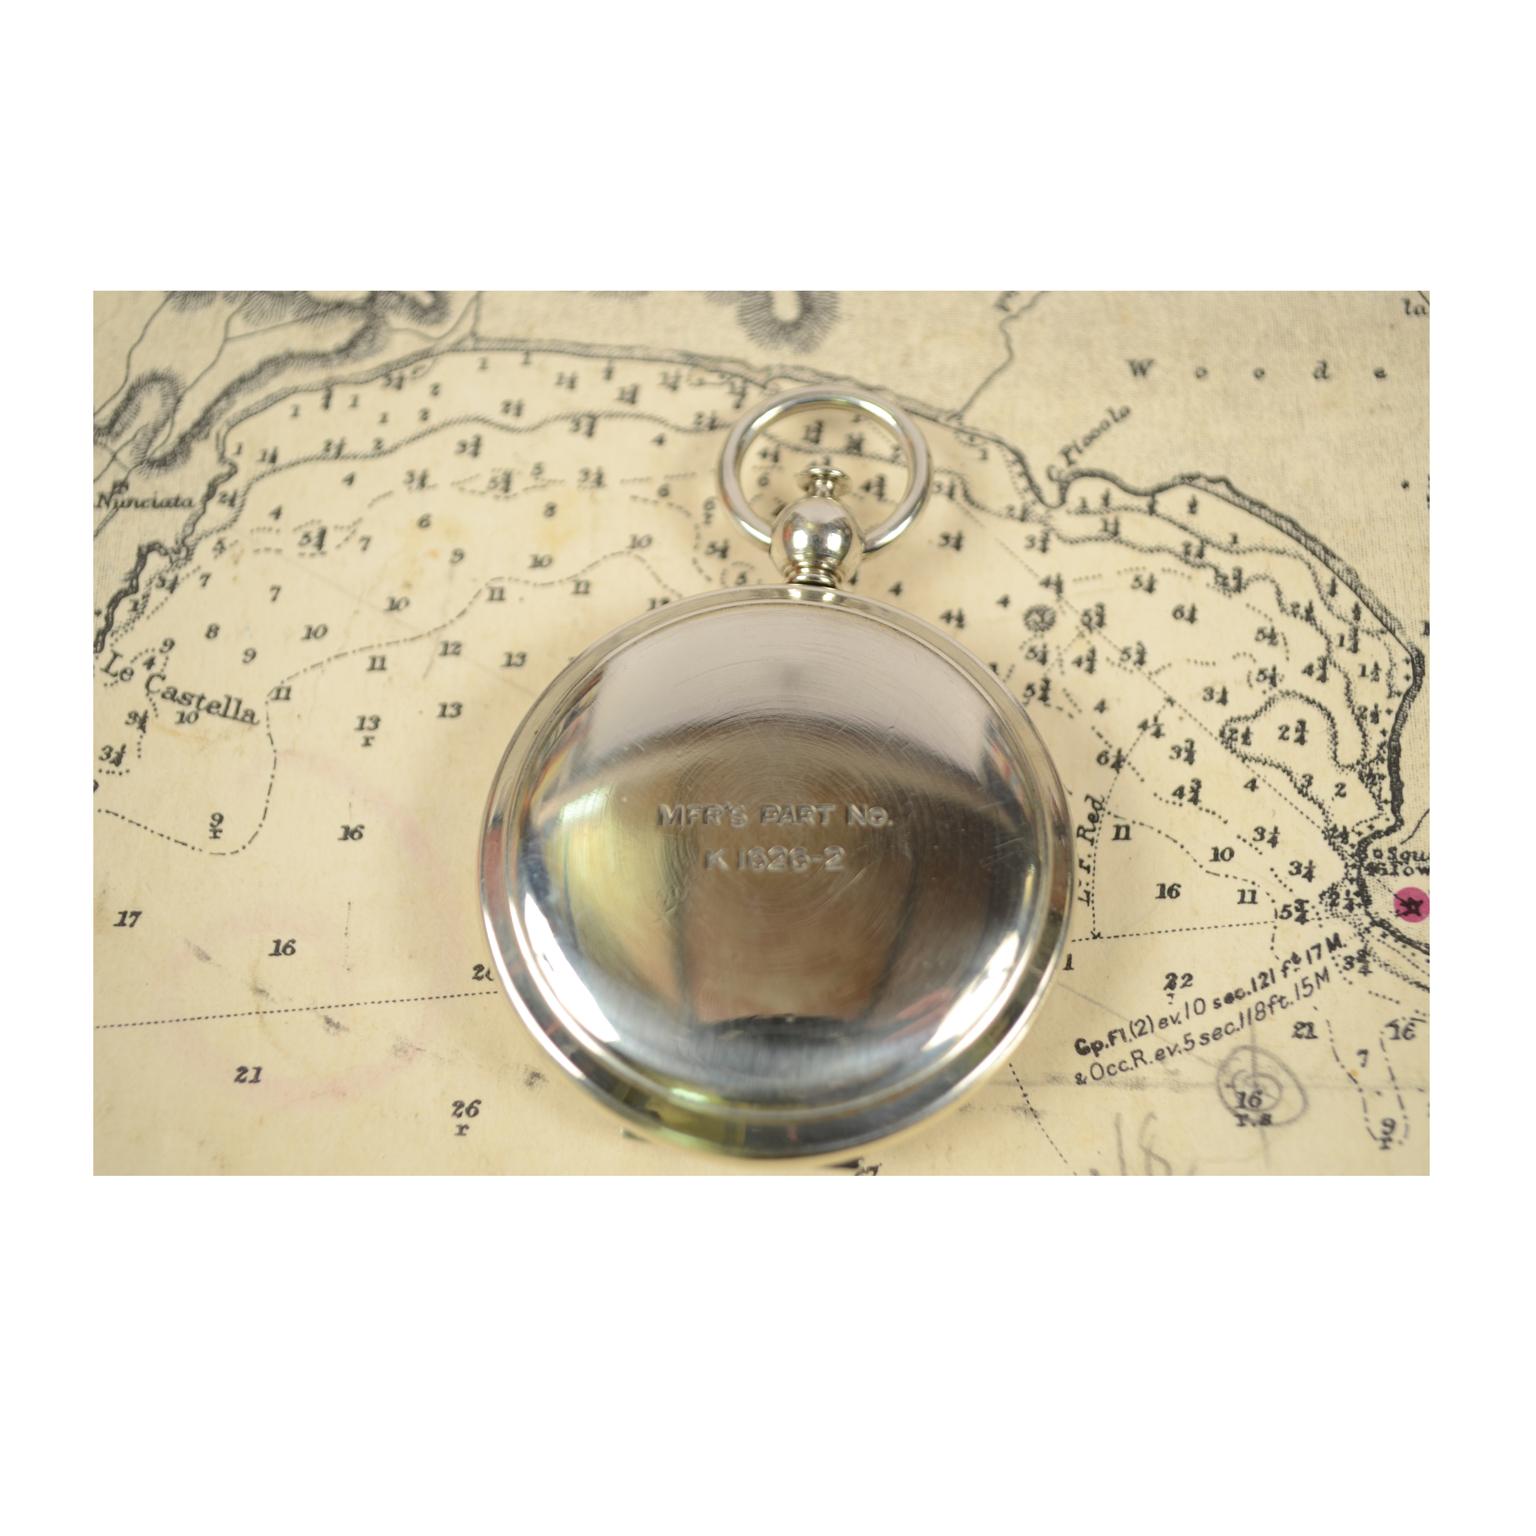 Compass Used by the American Aviation Officers in the 1920s Signed Wittnauer 5